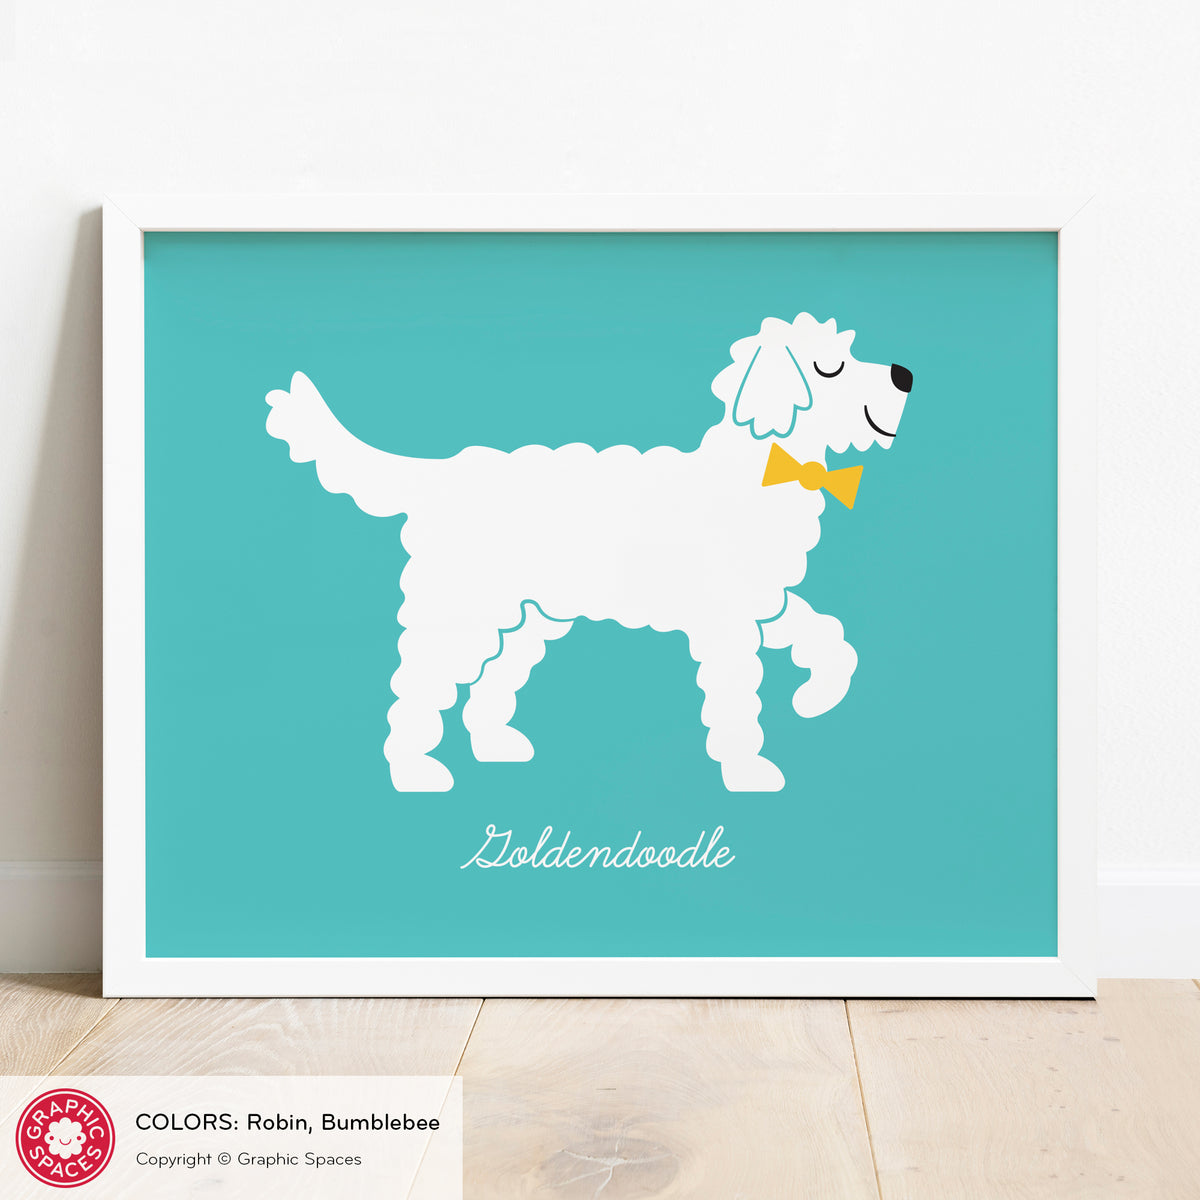 Goldendoodle nursery art print, personalized.